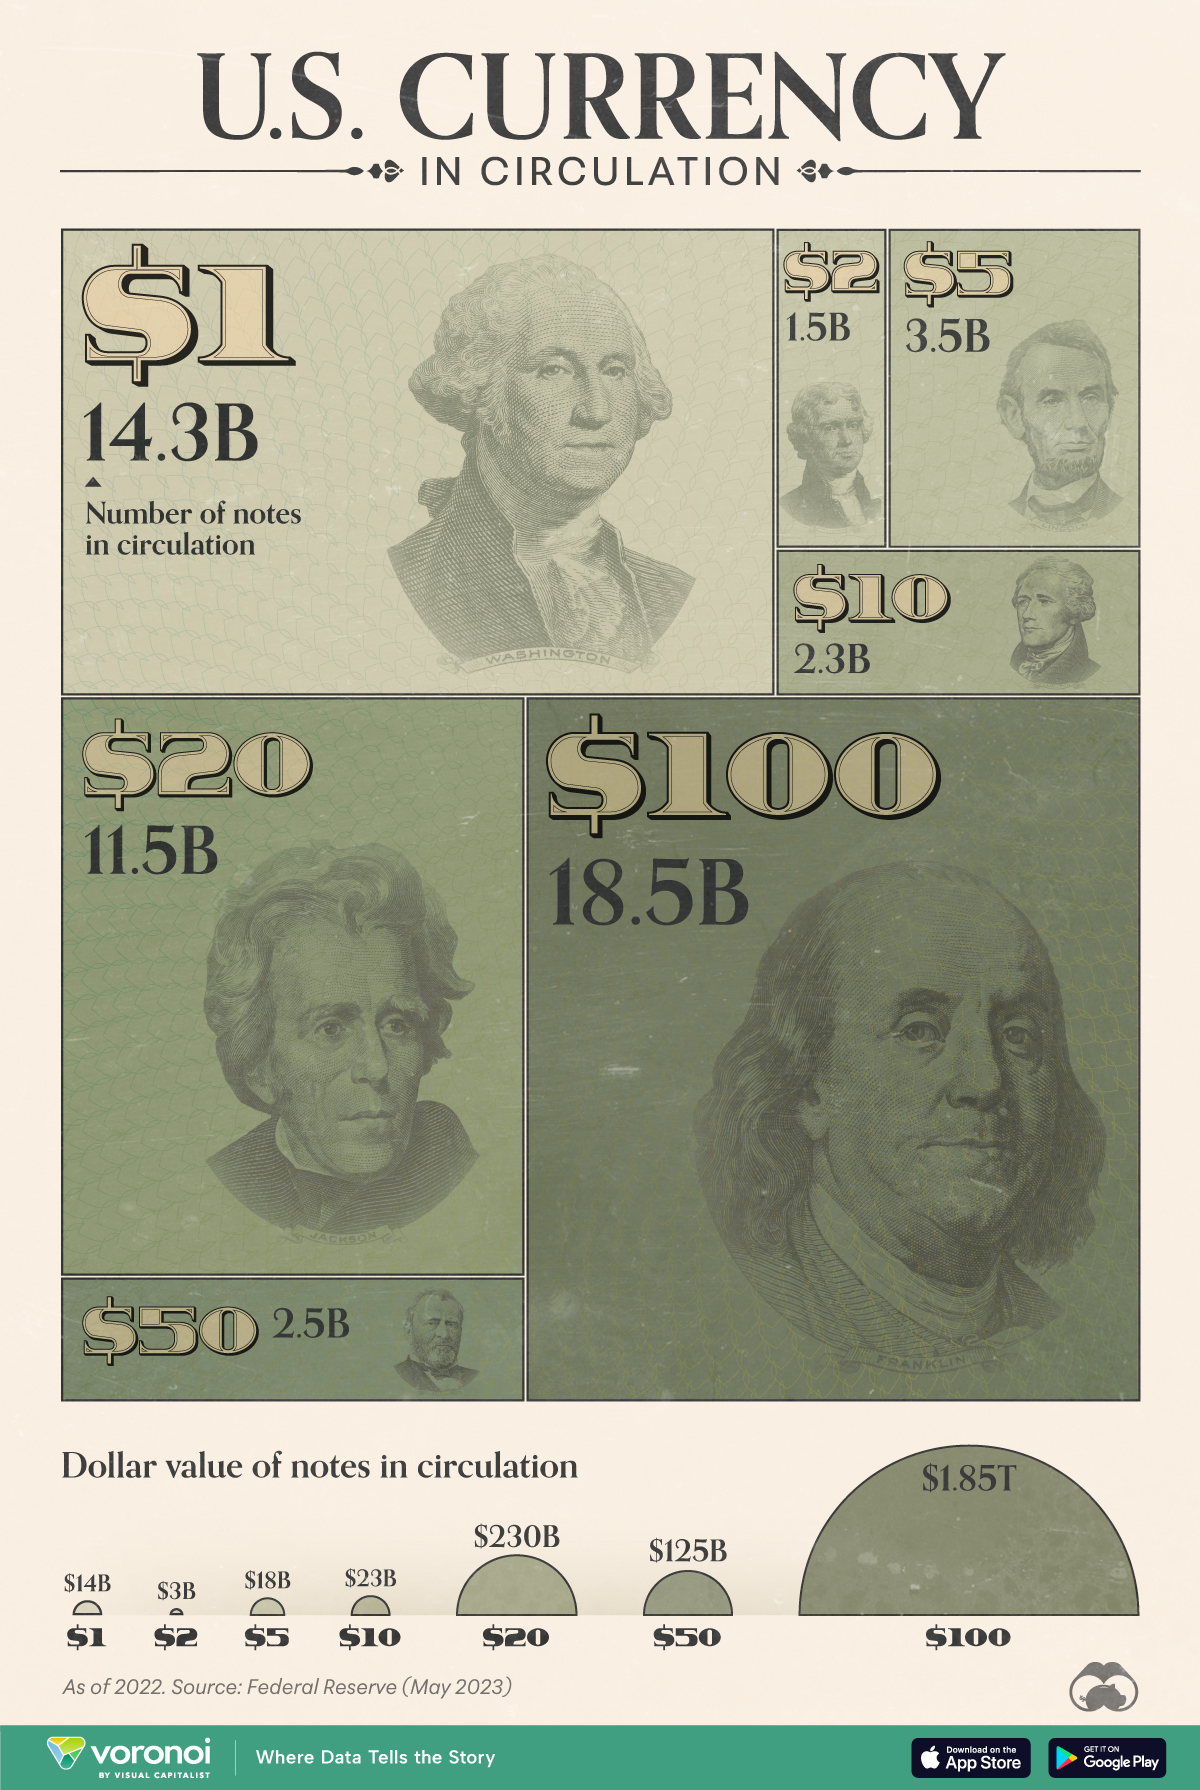 Graphic illustrating U.S. currency in circulation